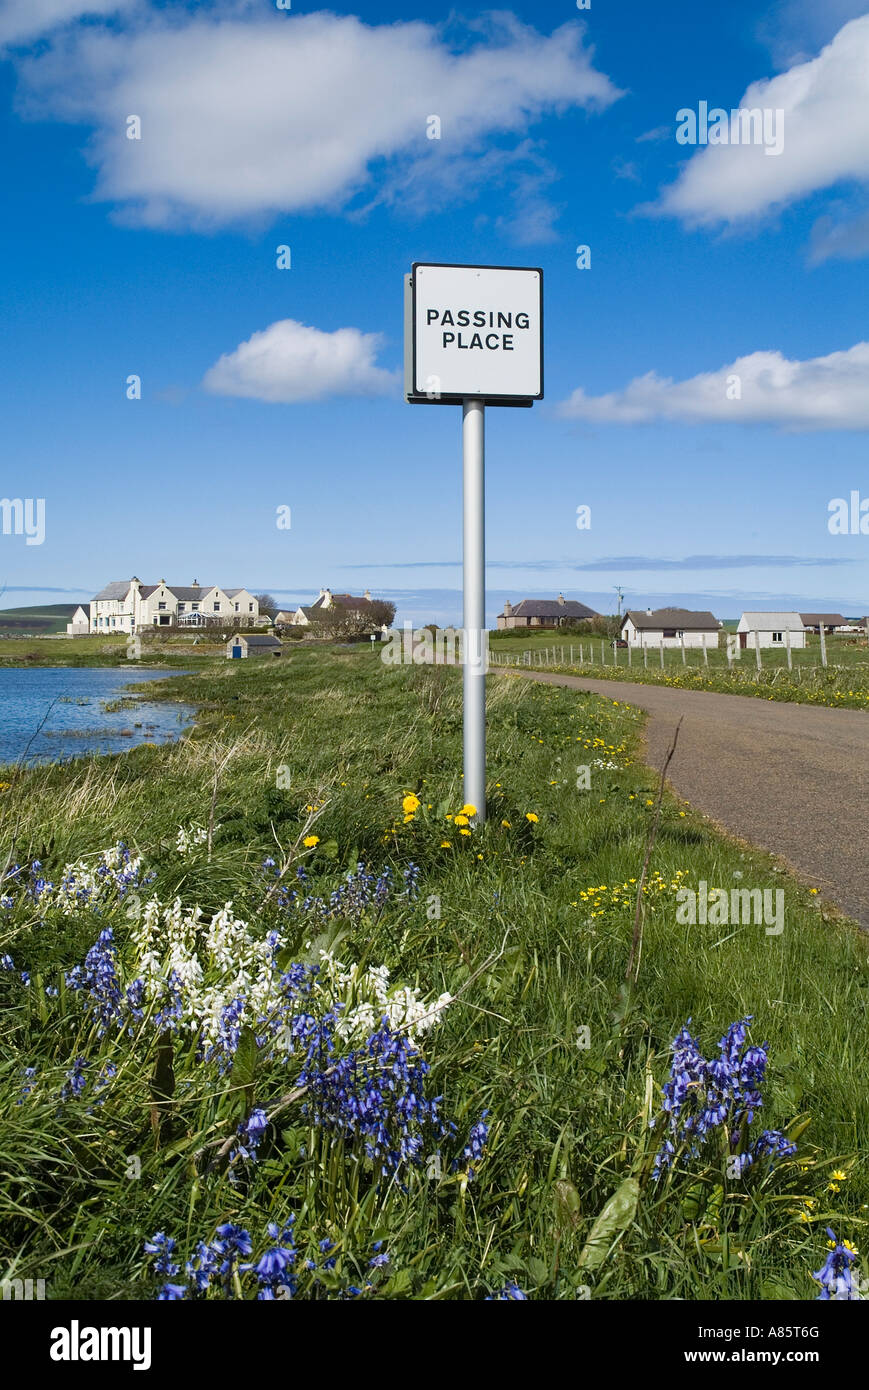 dh Passing place sign ROADSIGN UK Square shaped road sign and Orkney countryside post country lane scotland places Stock Photo